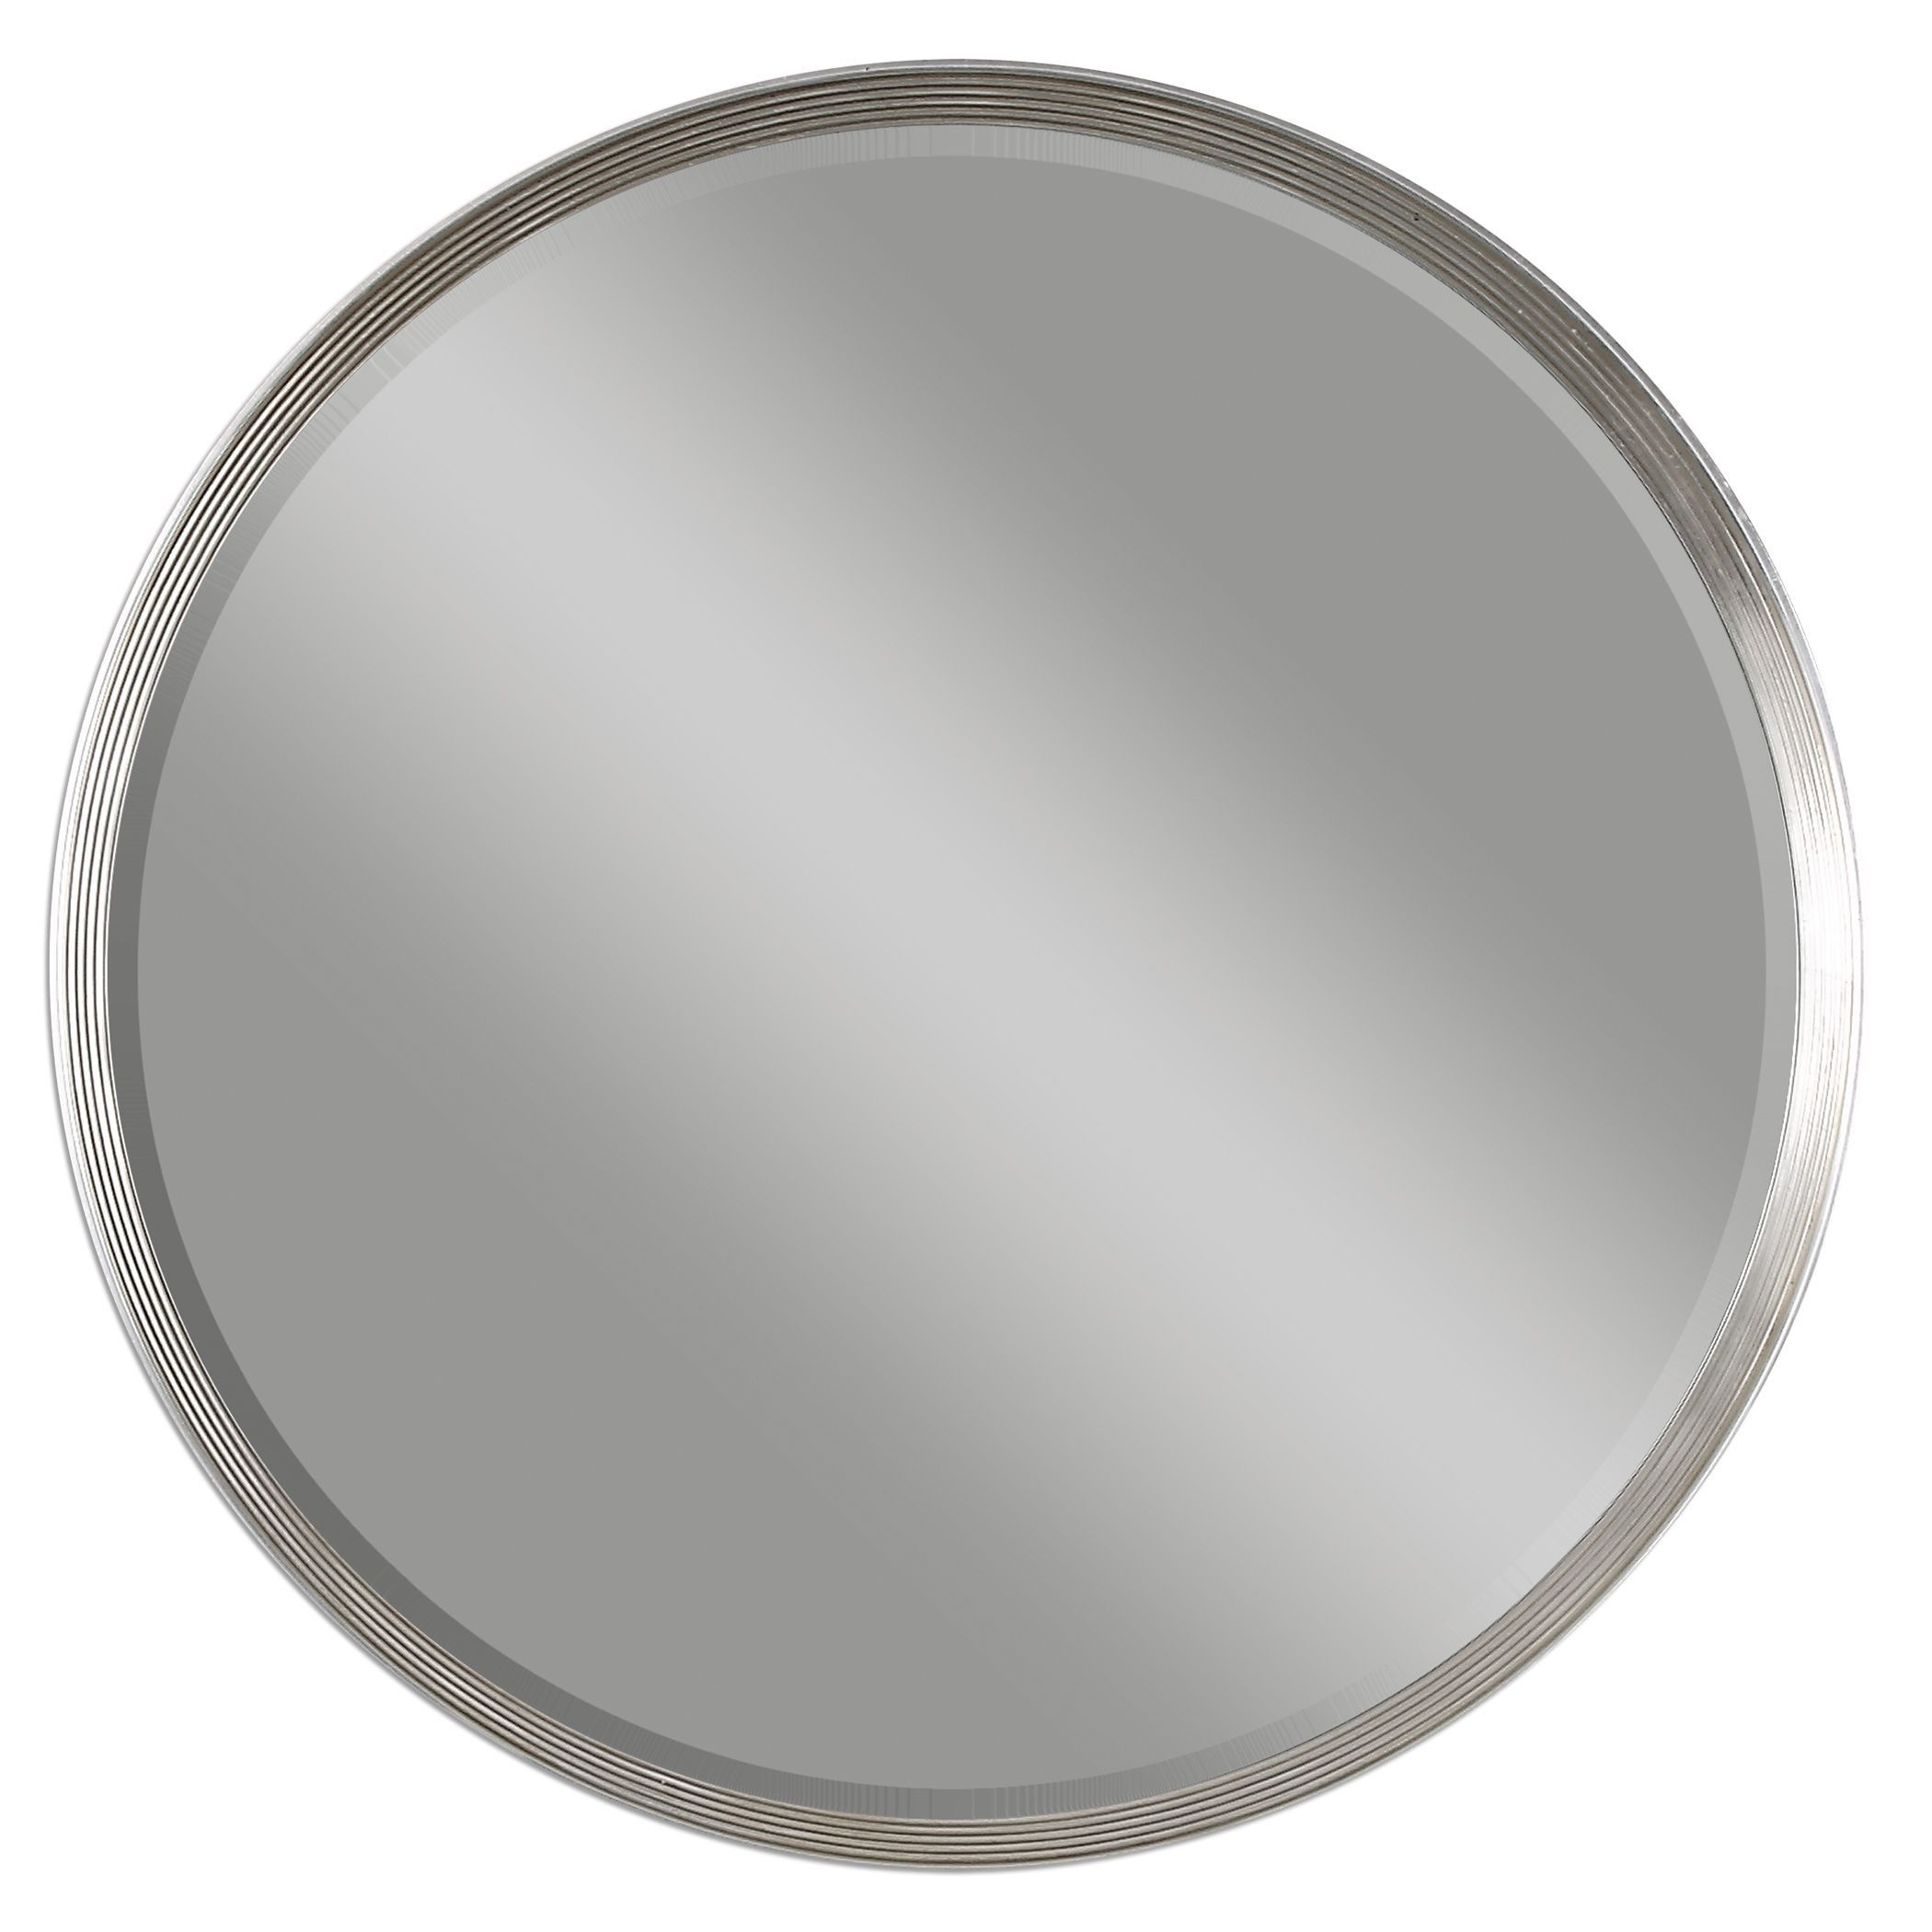 Serenza Round Silver Mirror From Uttermost (14547) | Coleman Furniture Throughout Silver Leaf Round Wall Mirrors (View 15 of 15)